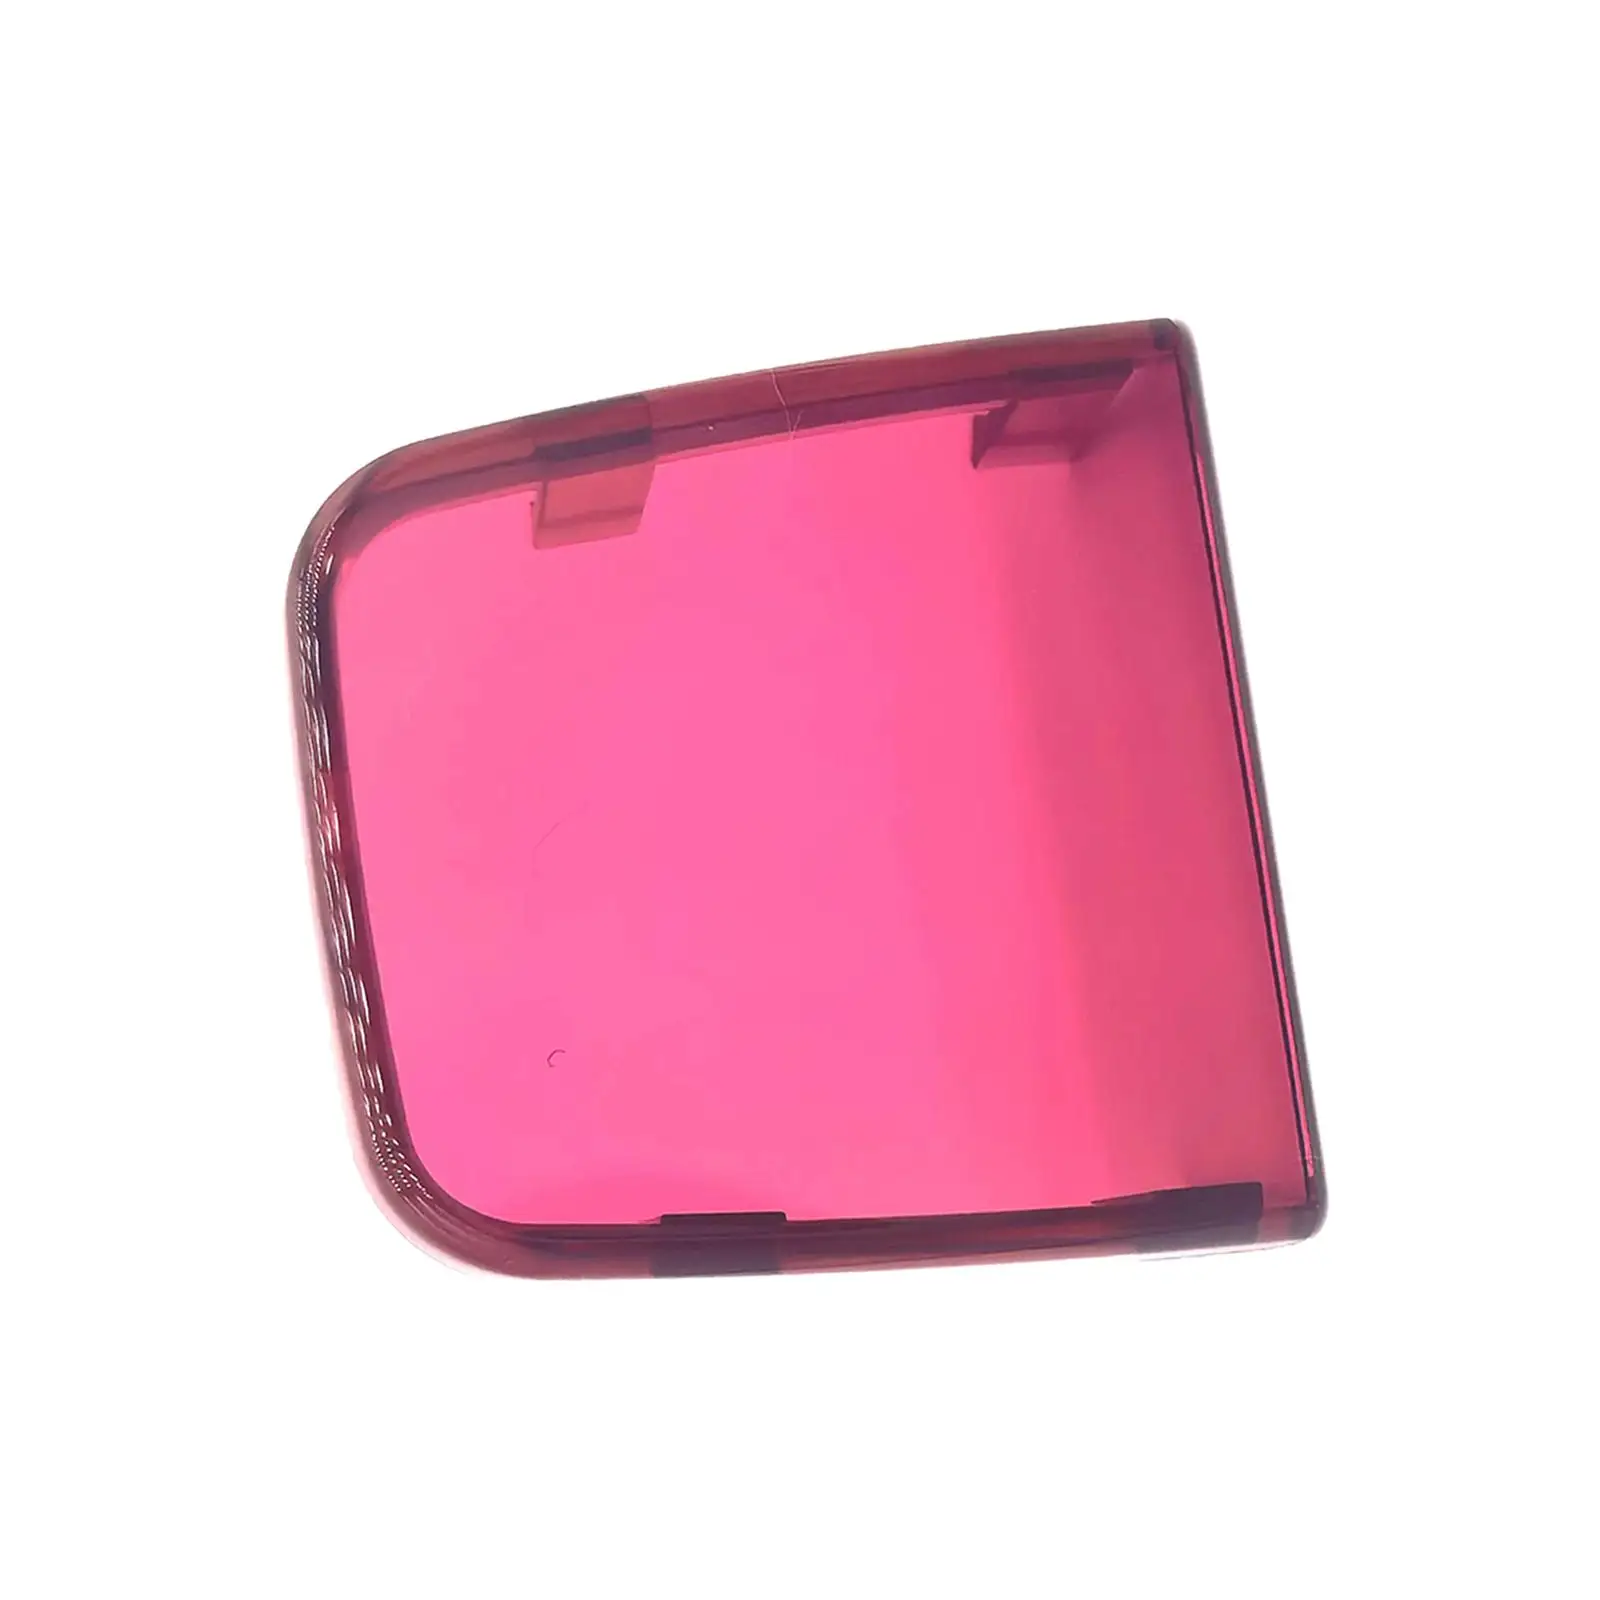 Durable Focusing Light Lid Pink Camera Flash light Cover Cap for Yn568EX Maintenance Spare Parts Repair Replacement